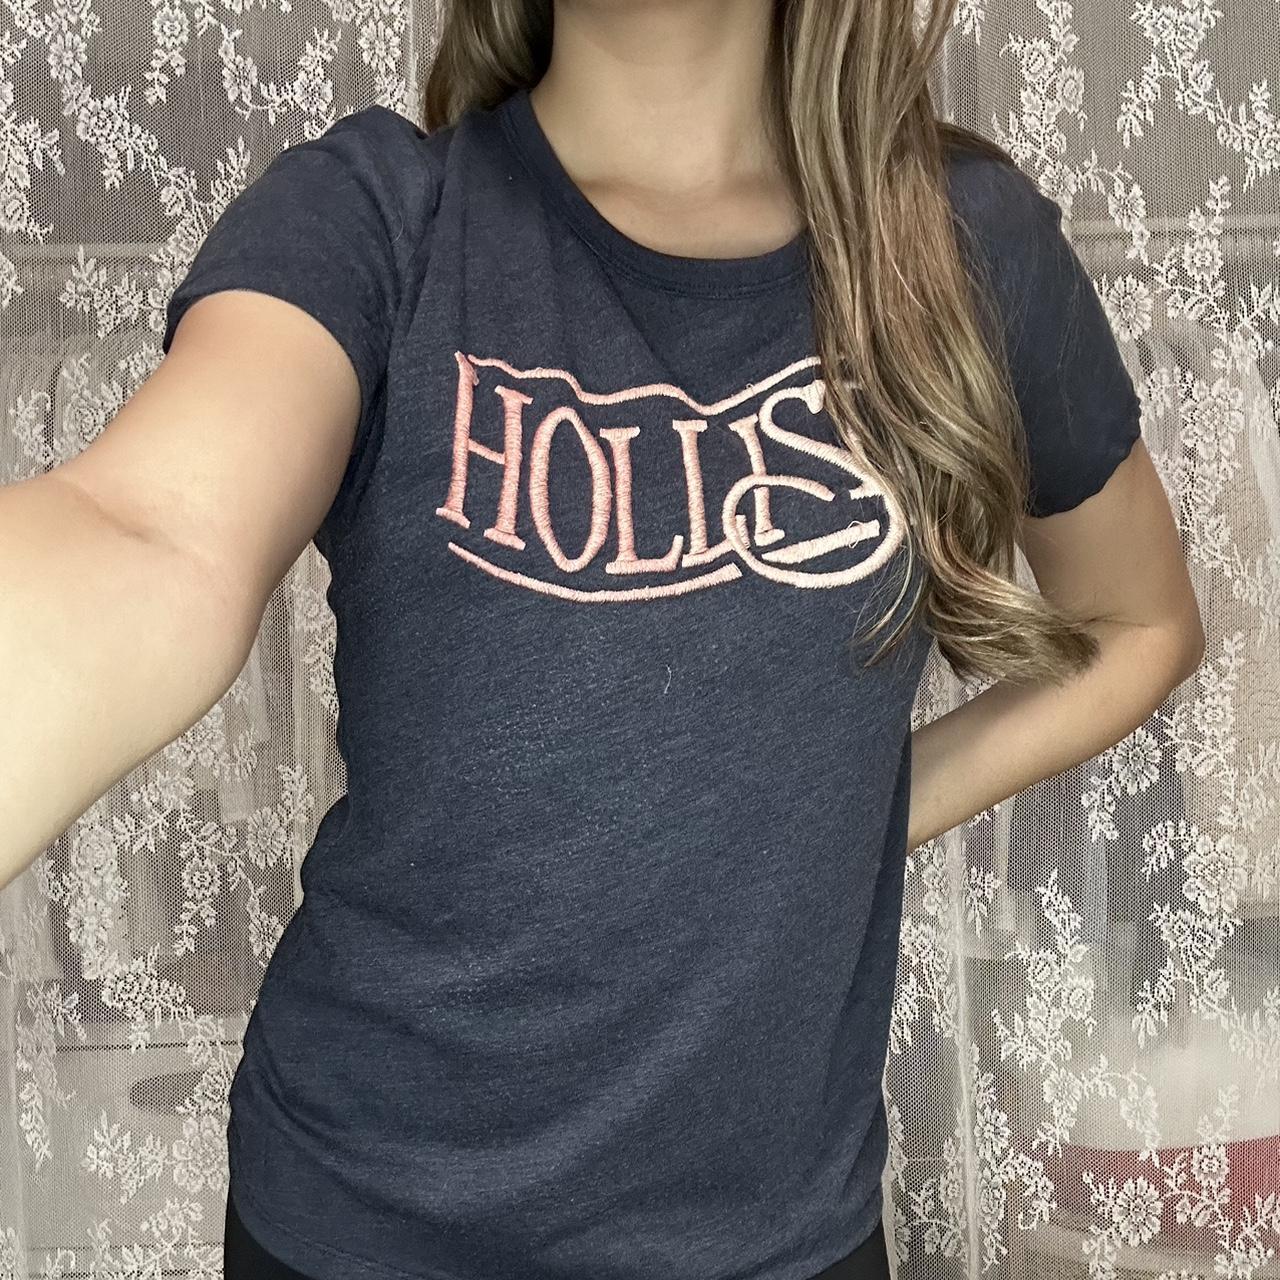 ♡ Hollister Tee ♡, - size m, - true to size / fits a